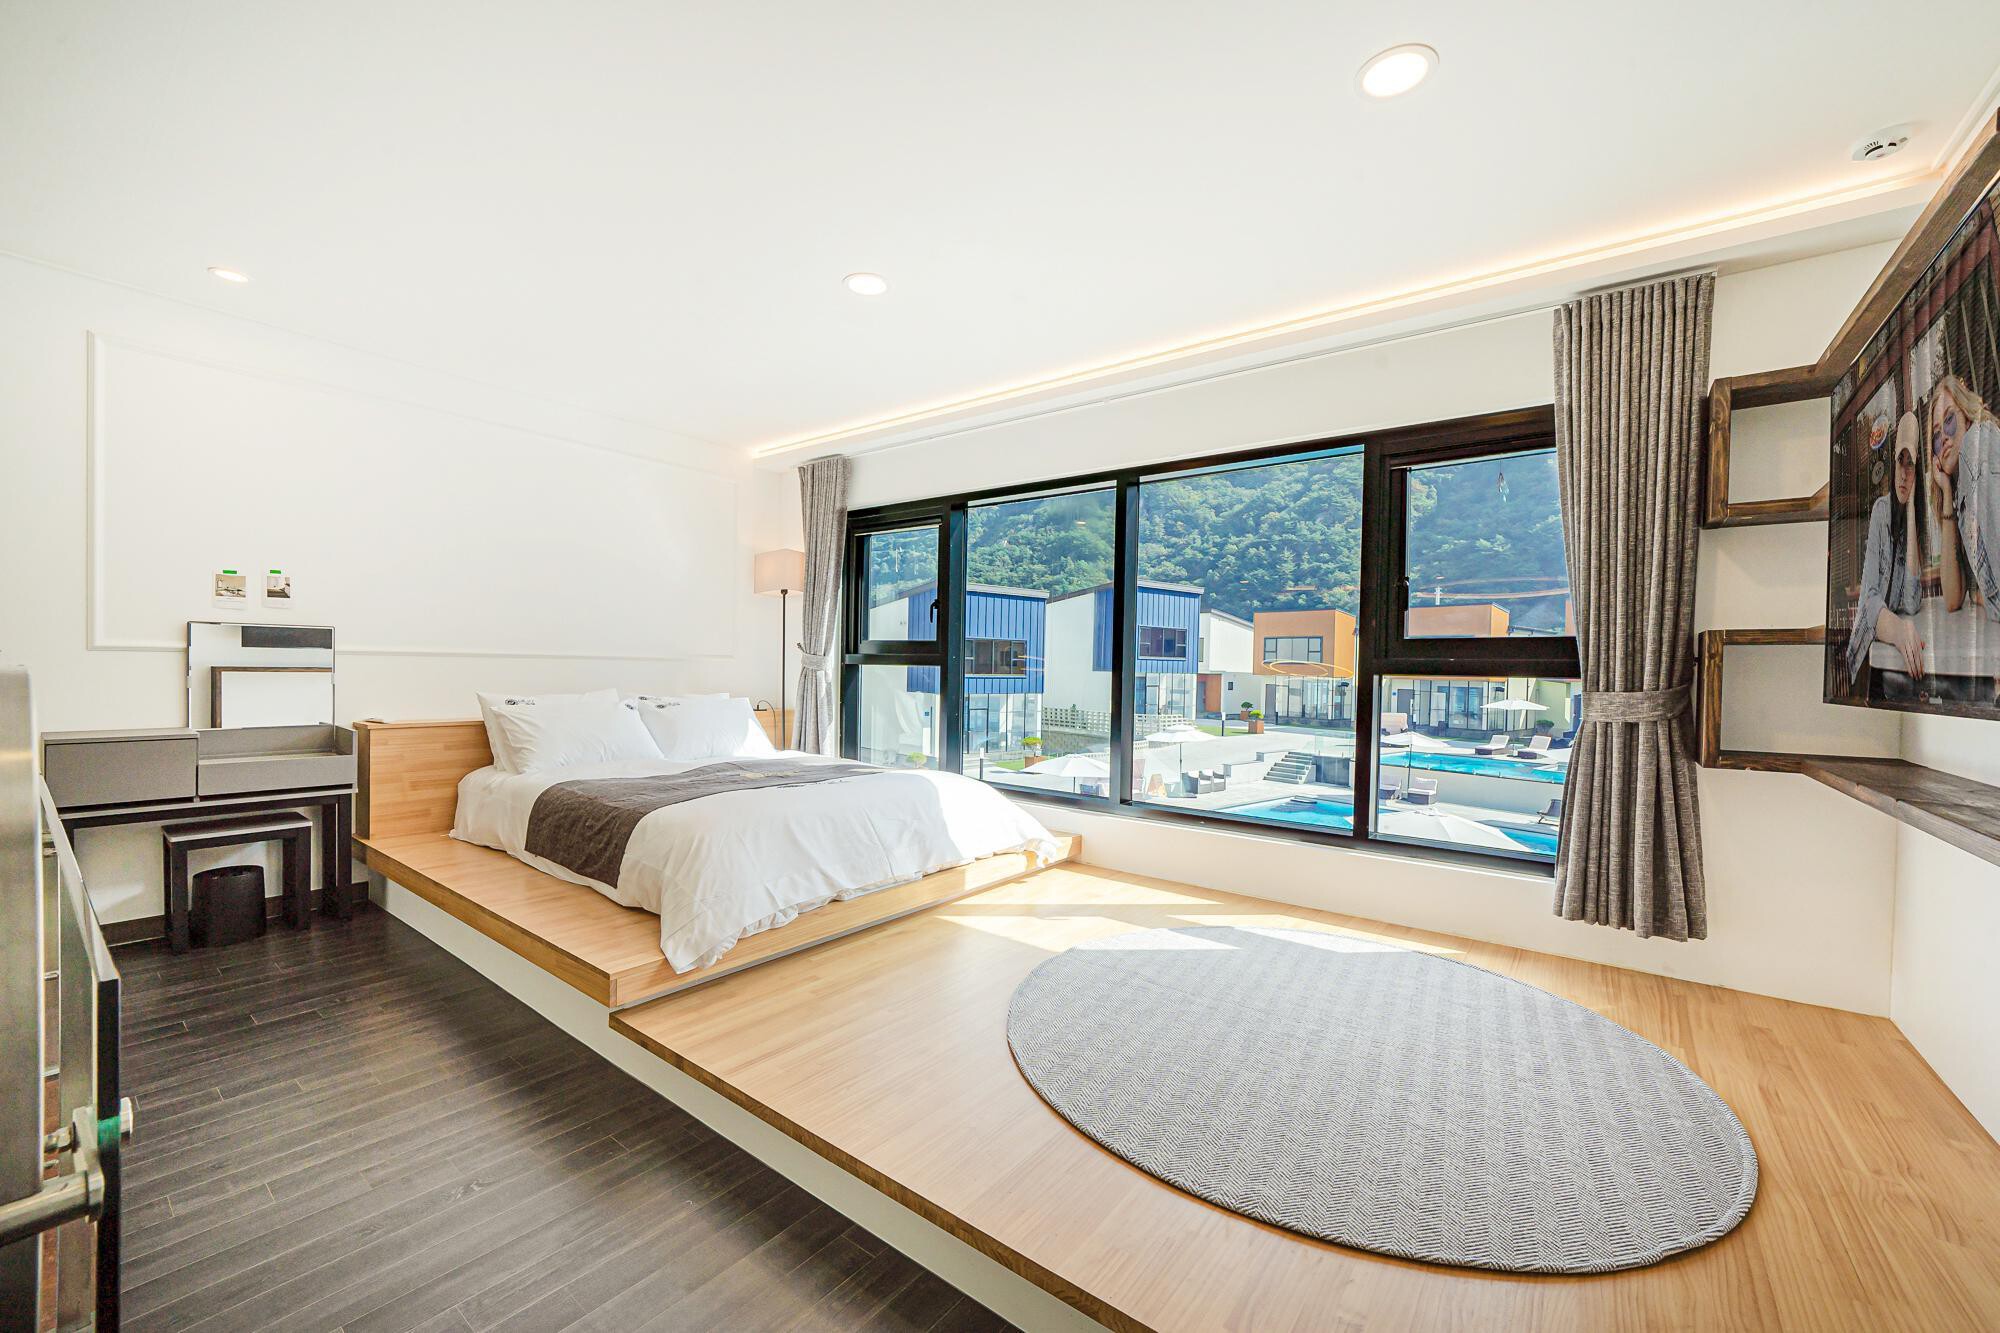 Property Image 2 - Modish Chic Villa with Private Pool in Gapyeong 16